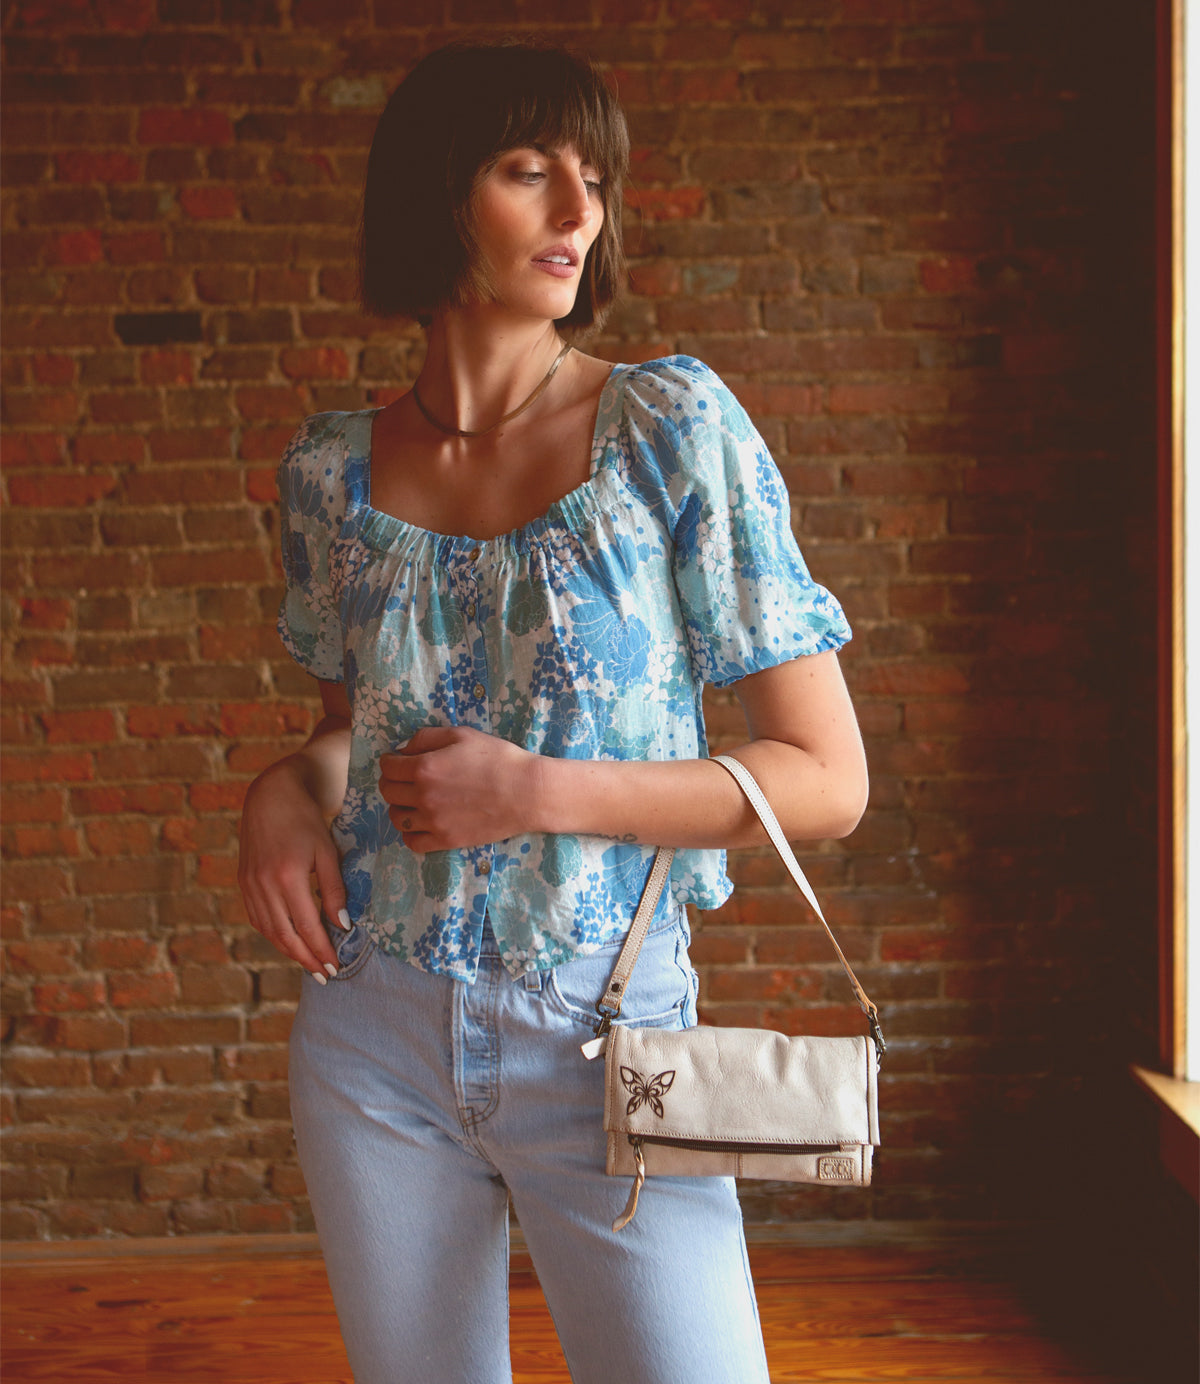 A woman in blue jeans and a floral top holding a sleek Bed Stu Amina II clutch.